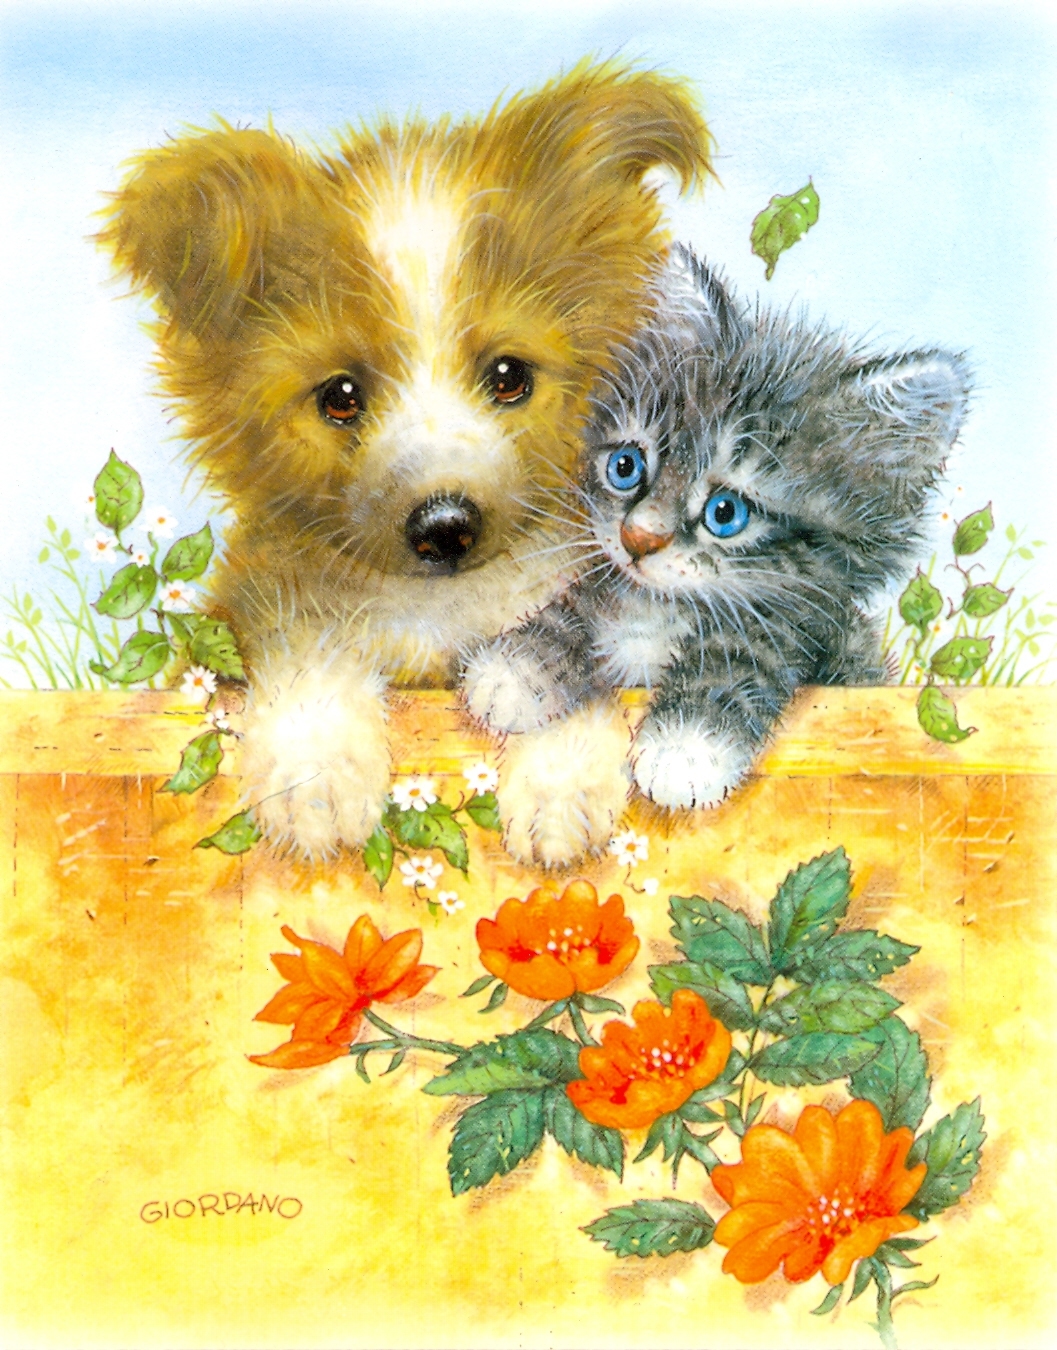 Mobile wallpaper pictures, animals, cats, dogs, yellow